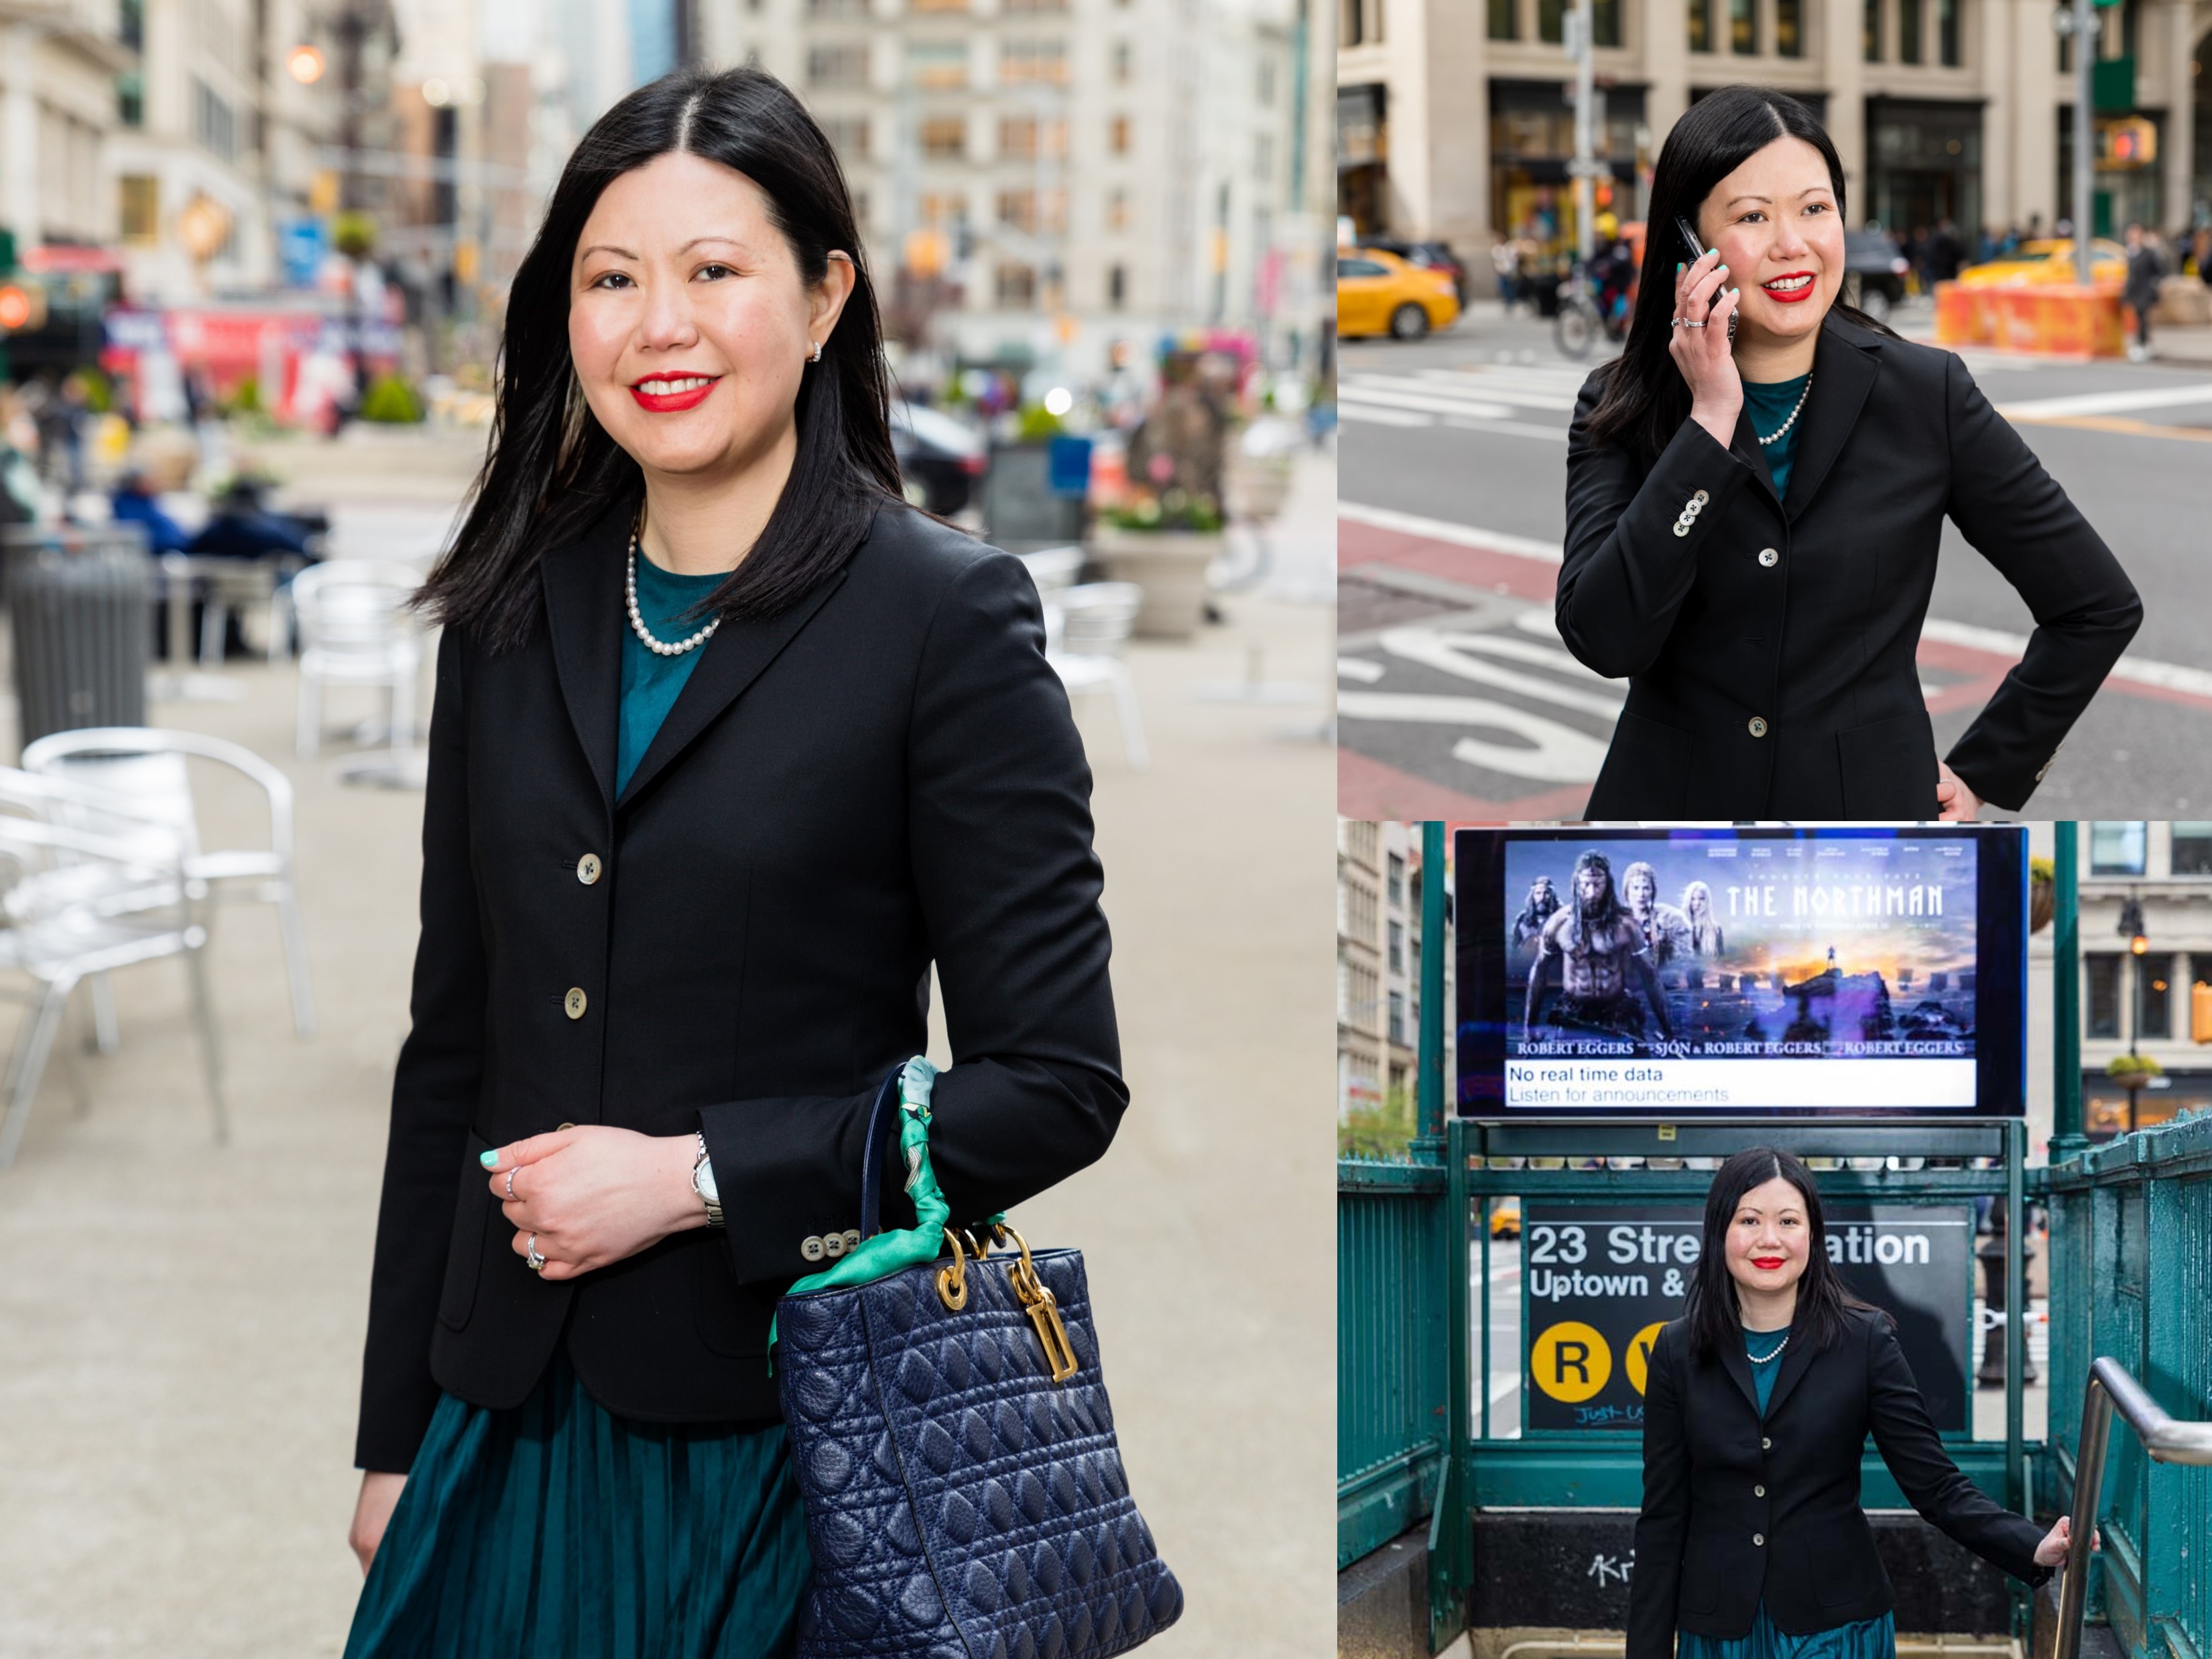 Personal Branding Photos for Monica “Tyler Moore” of NYC